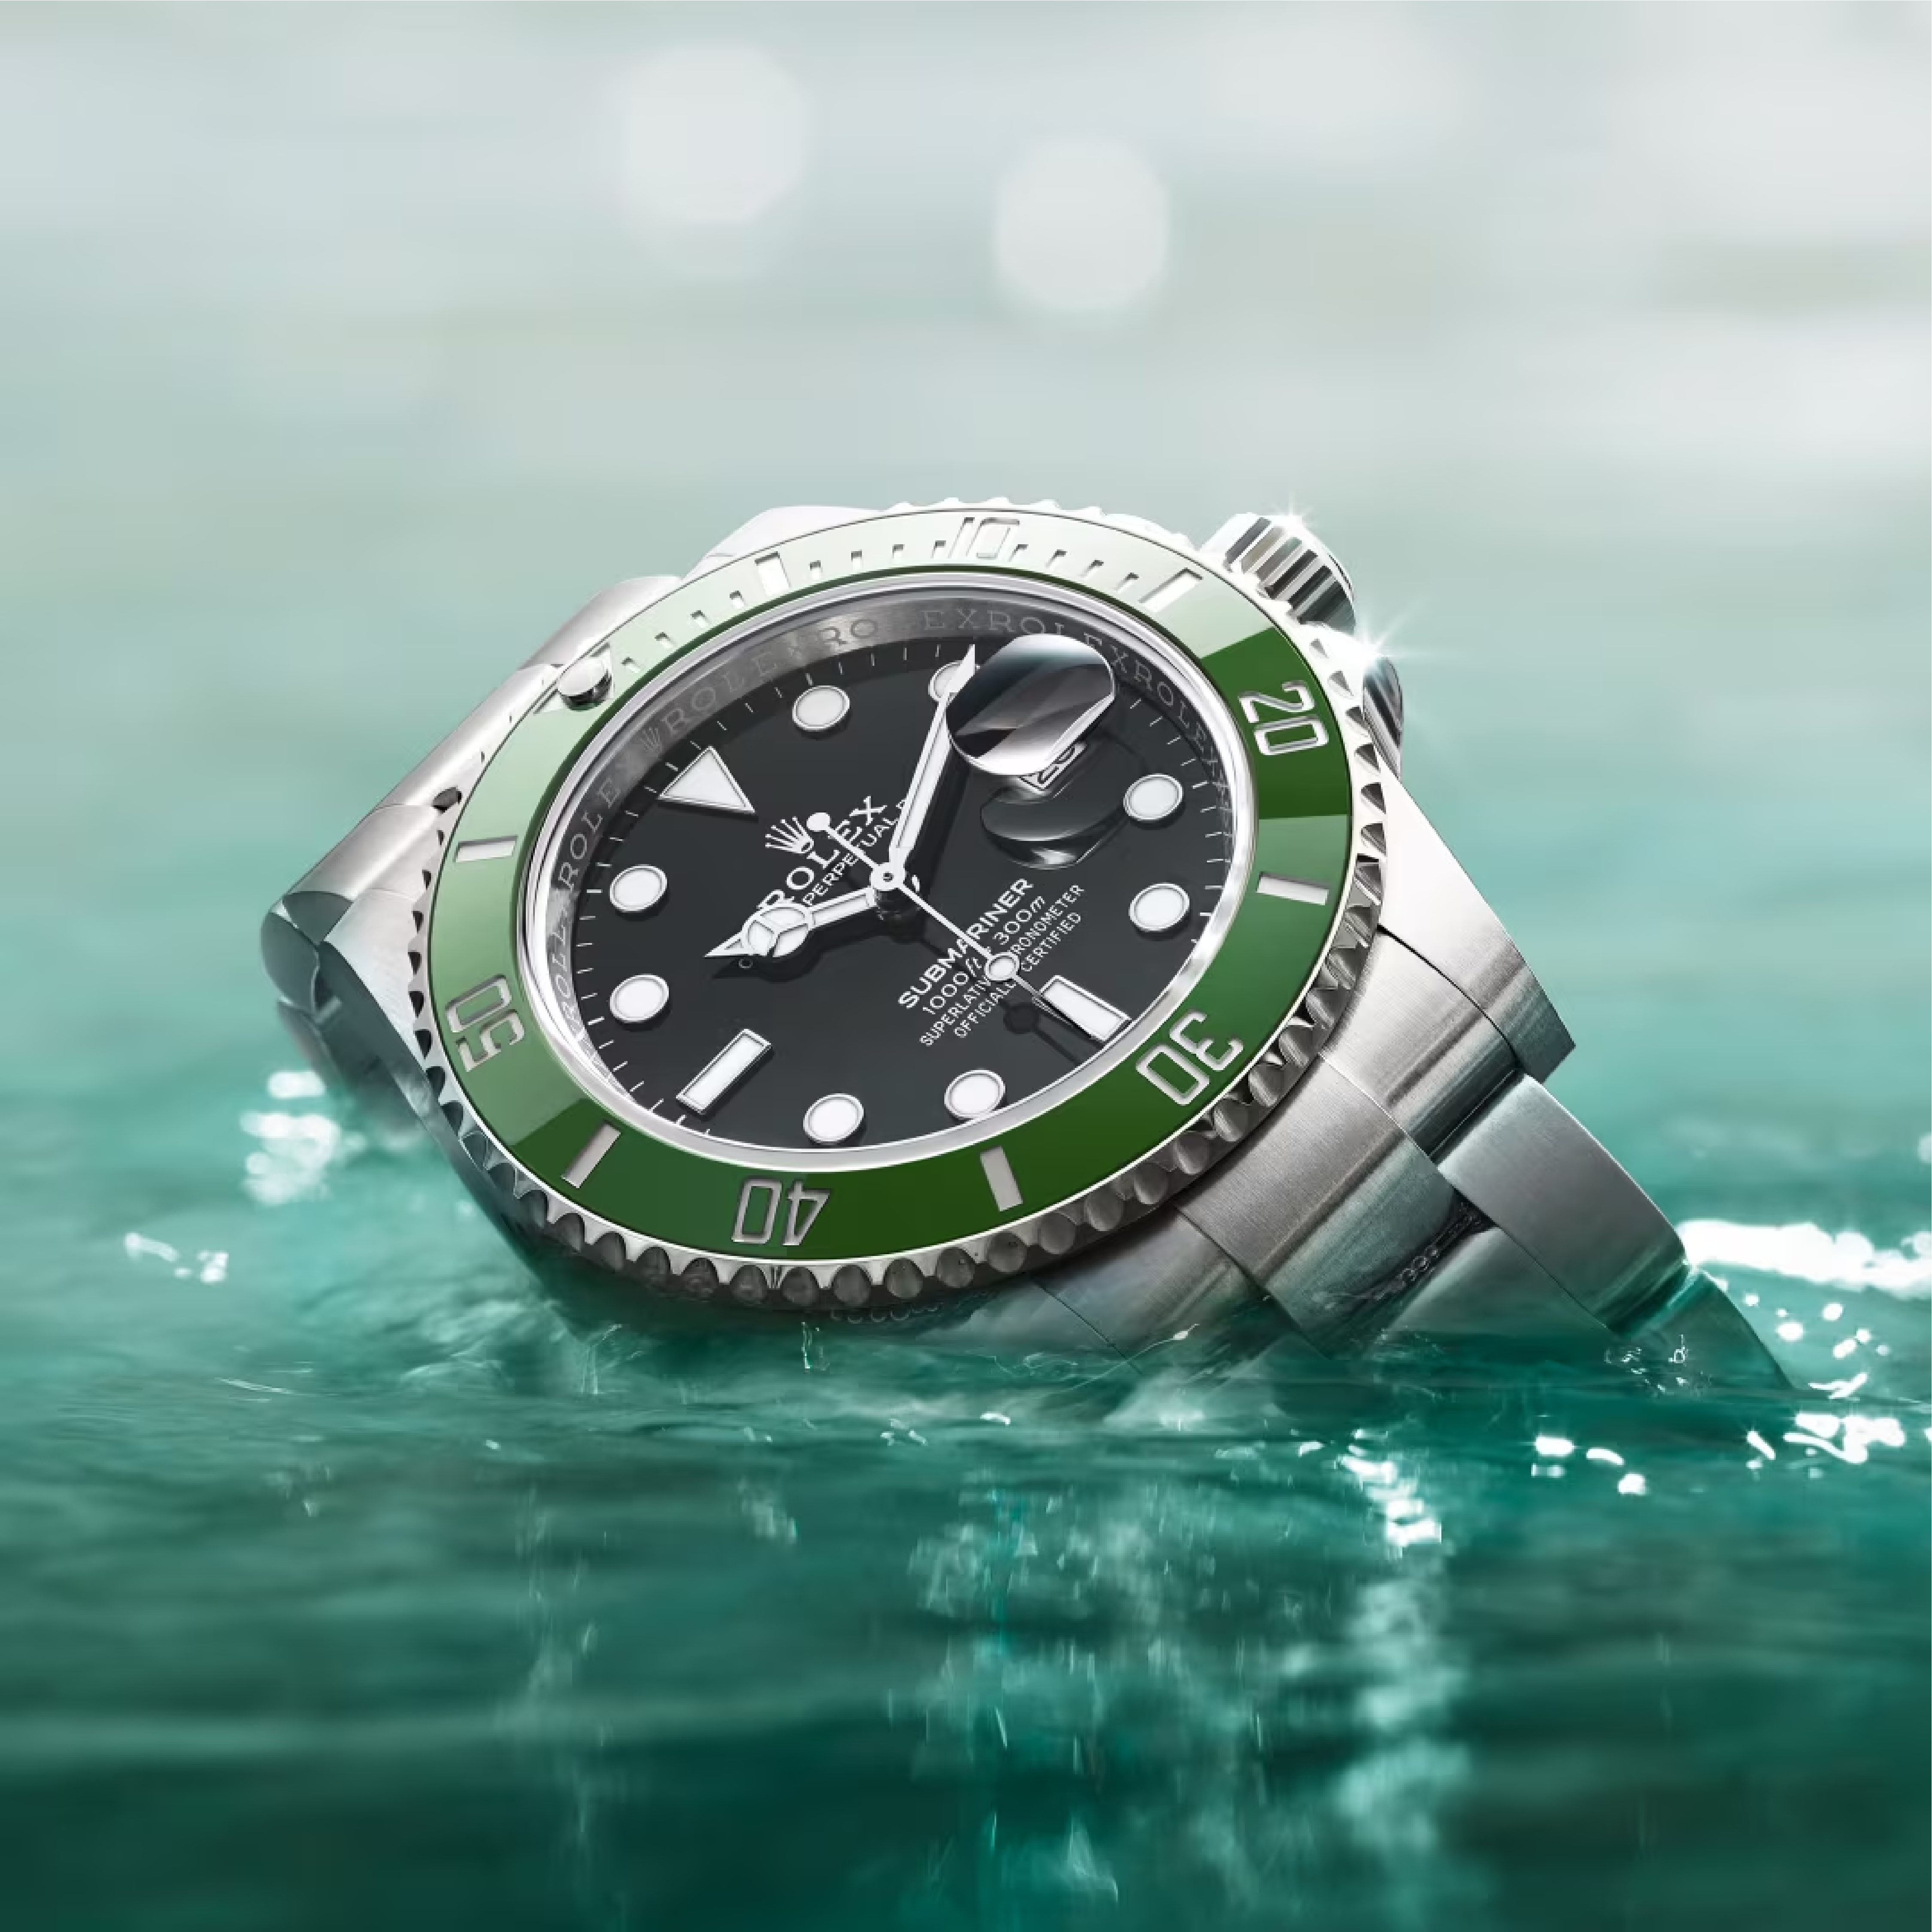 Everything you need to know about Rolex watches